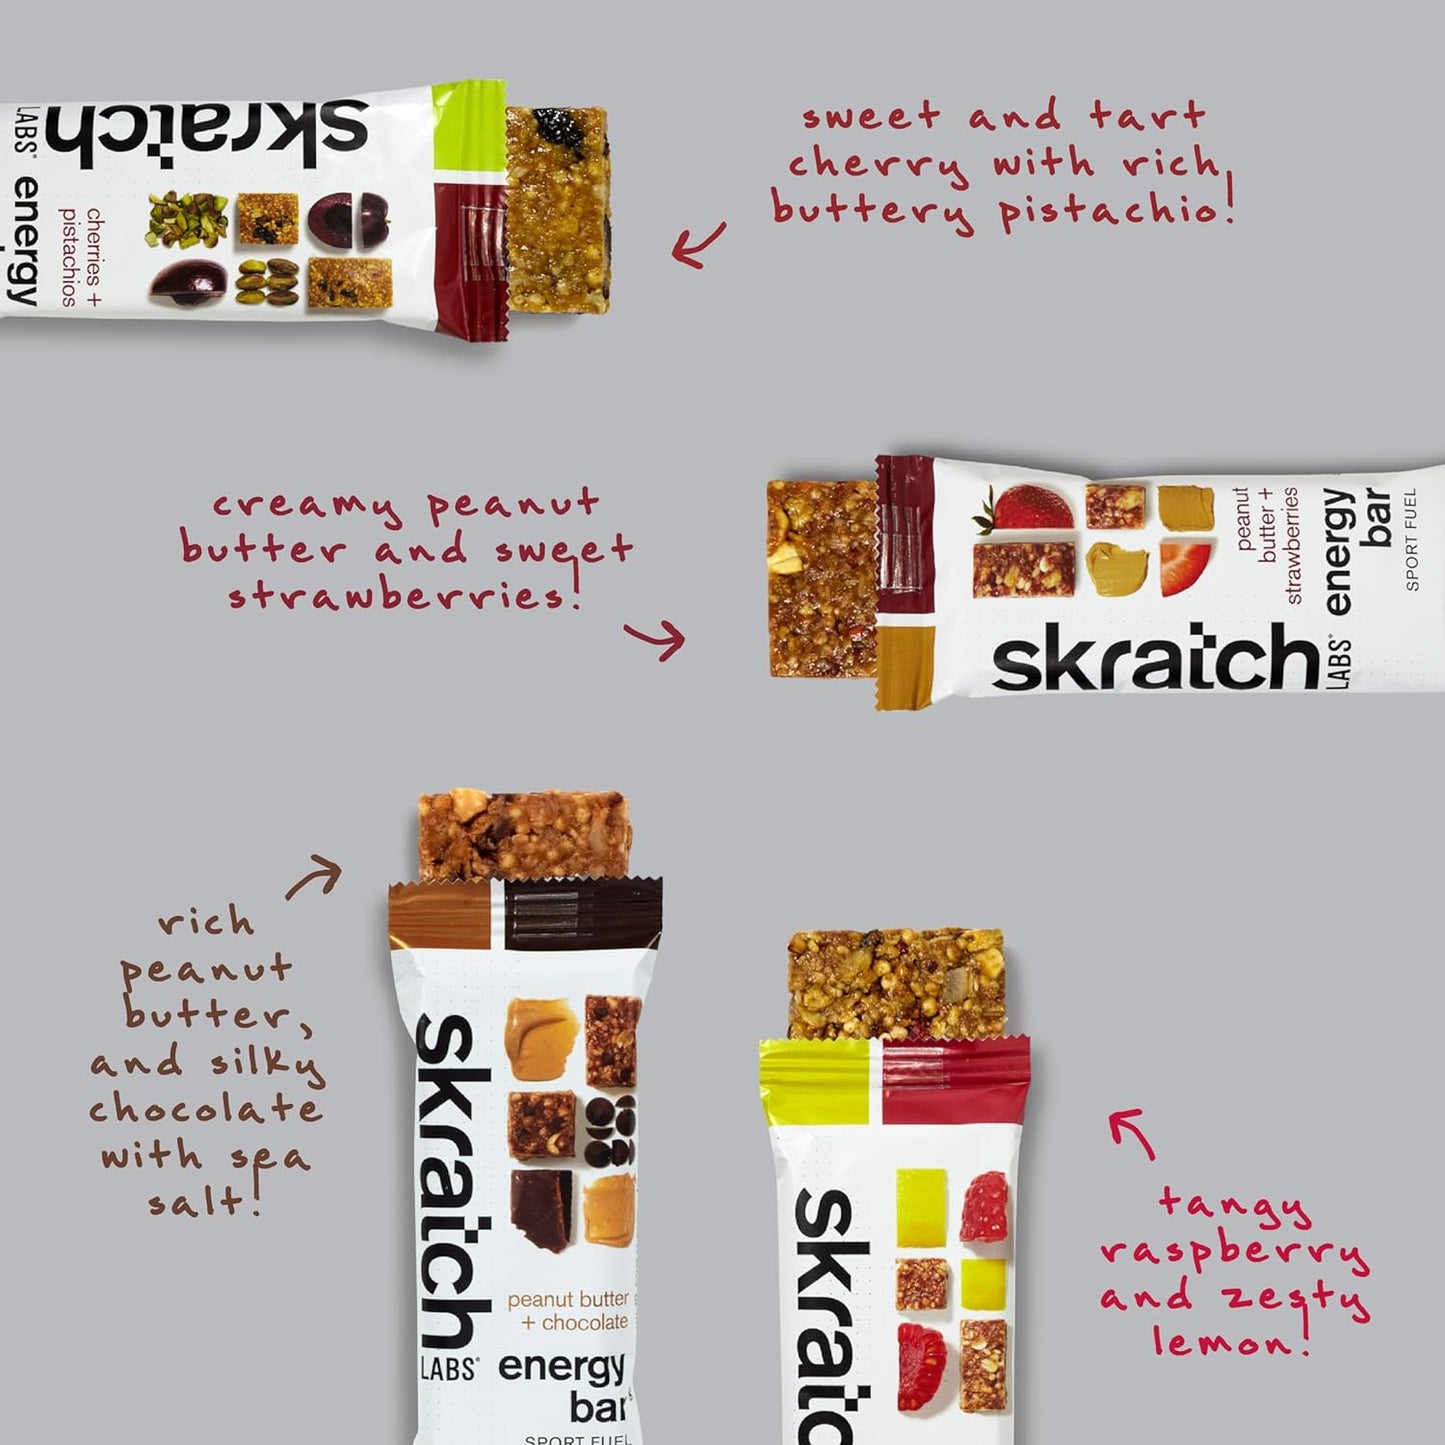 Energy Bar | Variety Pack (12 Pack) | Plant Based Healthy Snack | Low Sugar, Plant Protein, Ancient Grains | Non-Gmo, Gluten Free, Soy Free, Vegan, Kosher